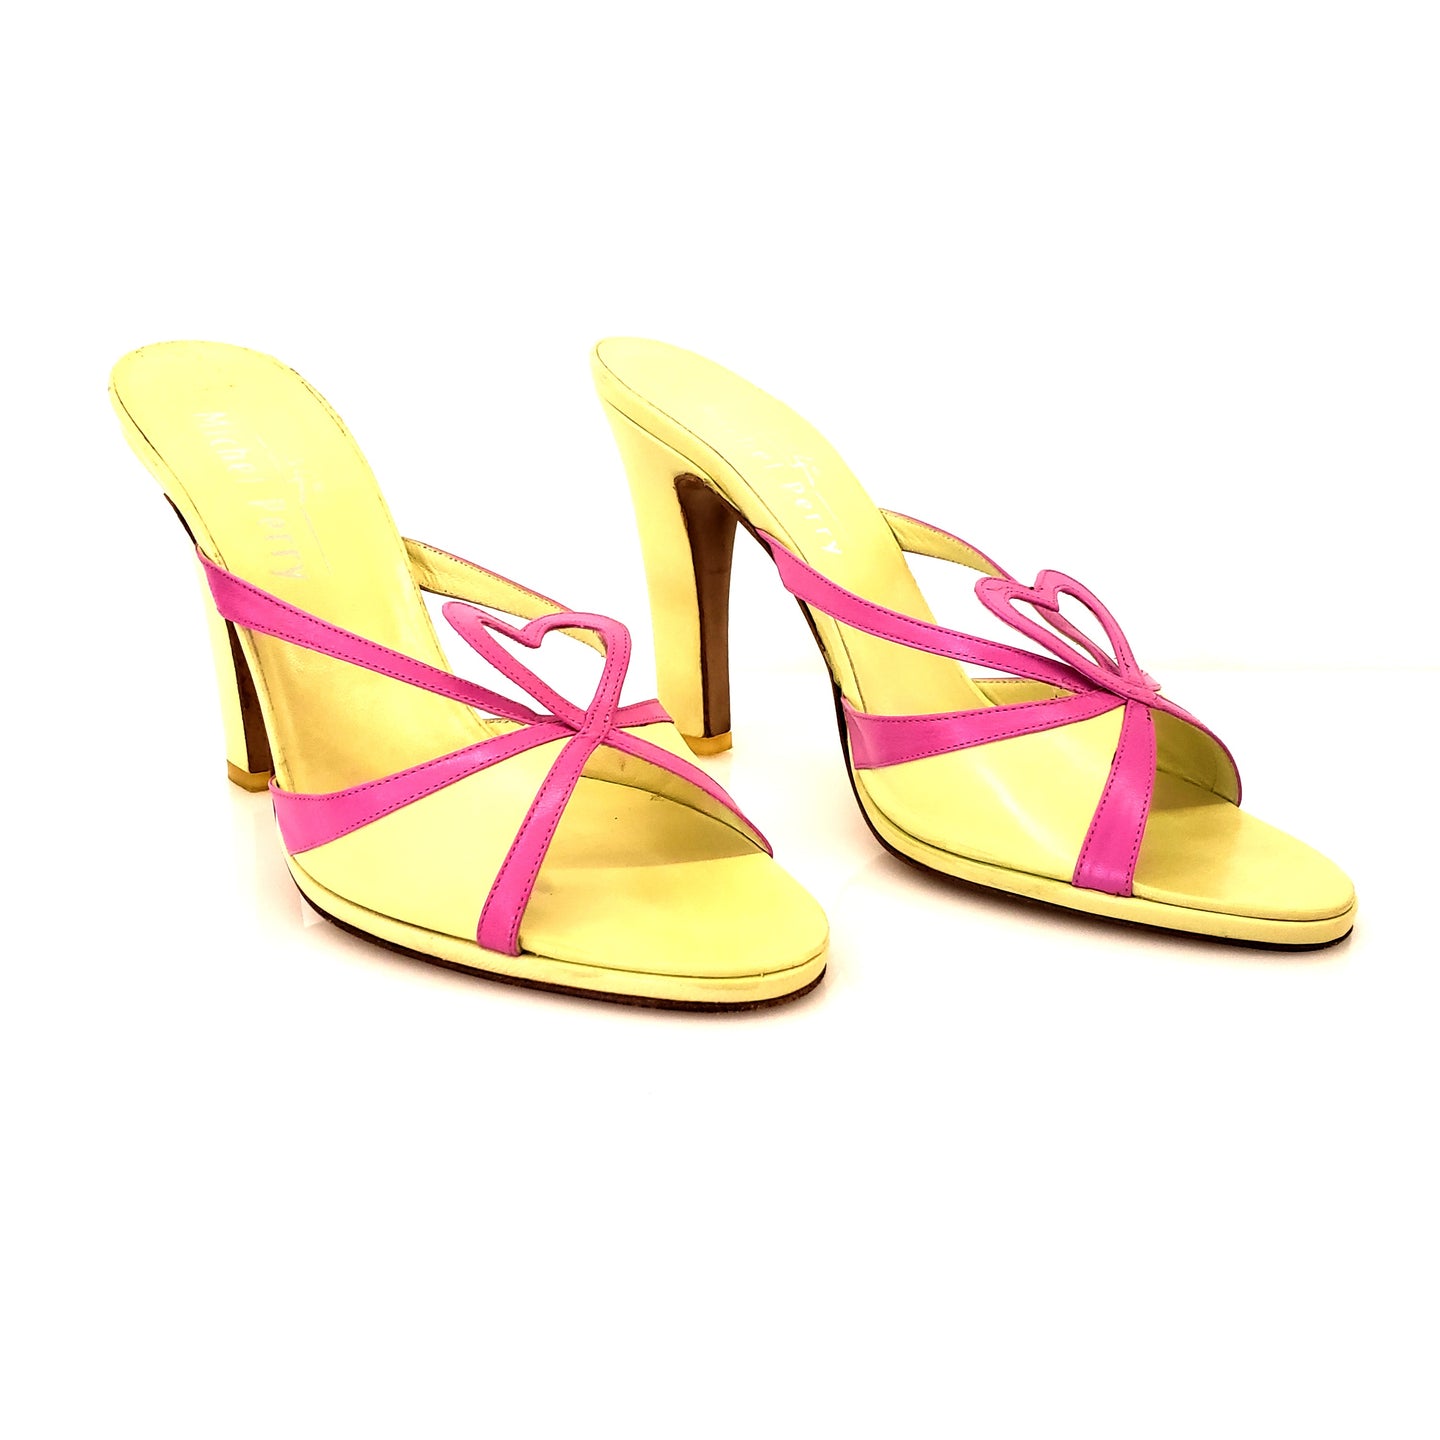 Michel perry Neon Green and Pink (Fucsia) Heart Sandals